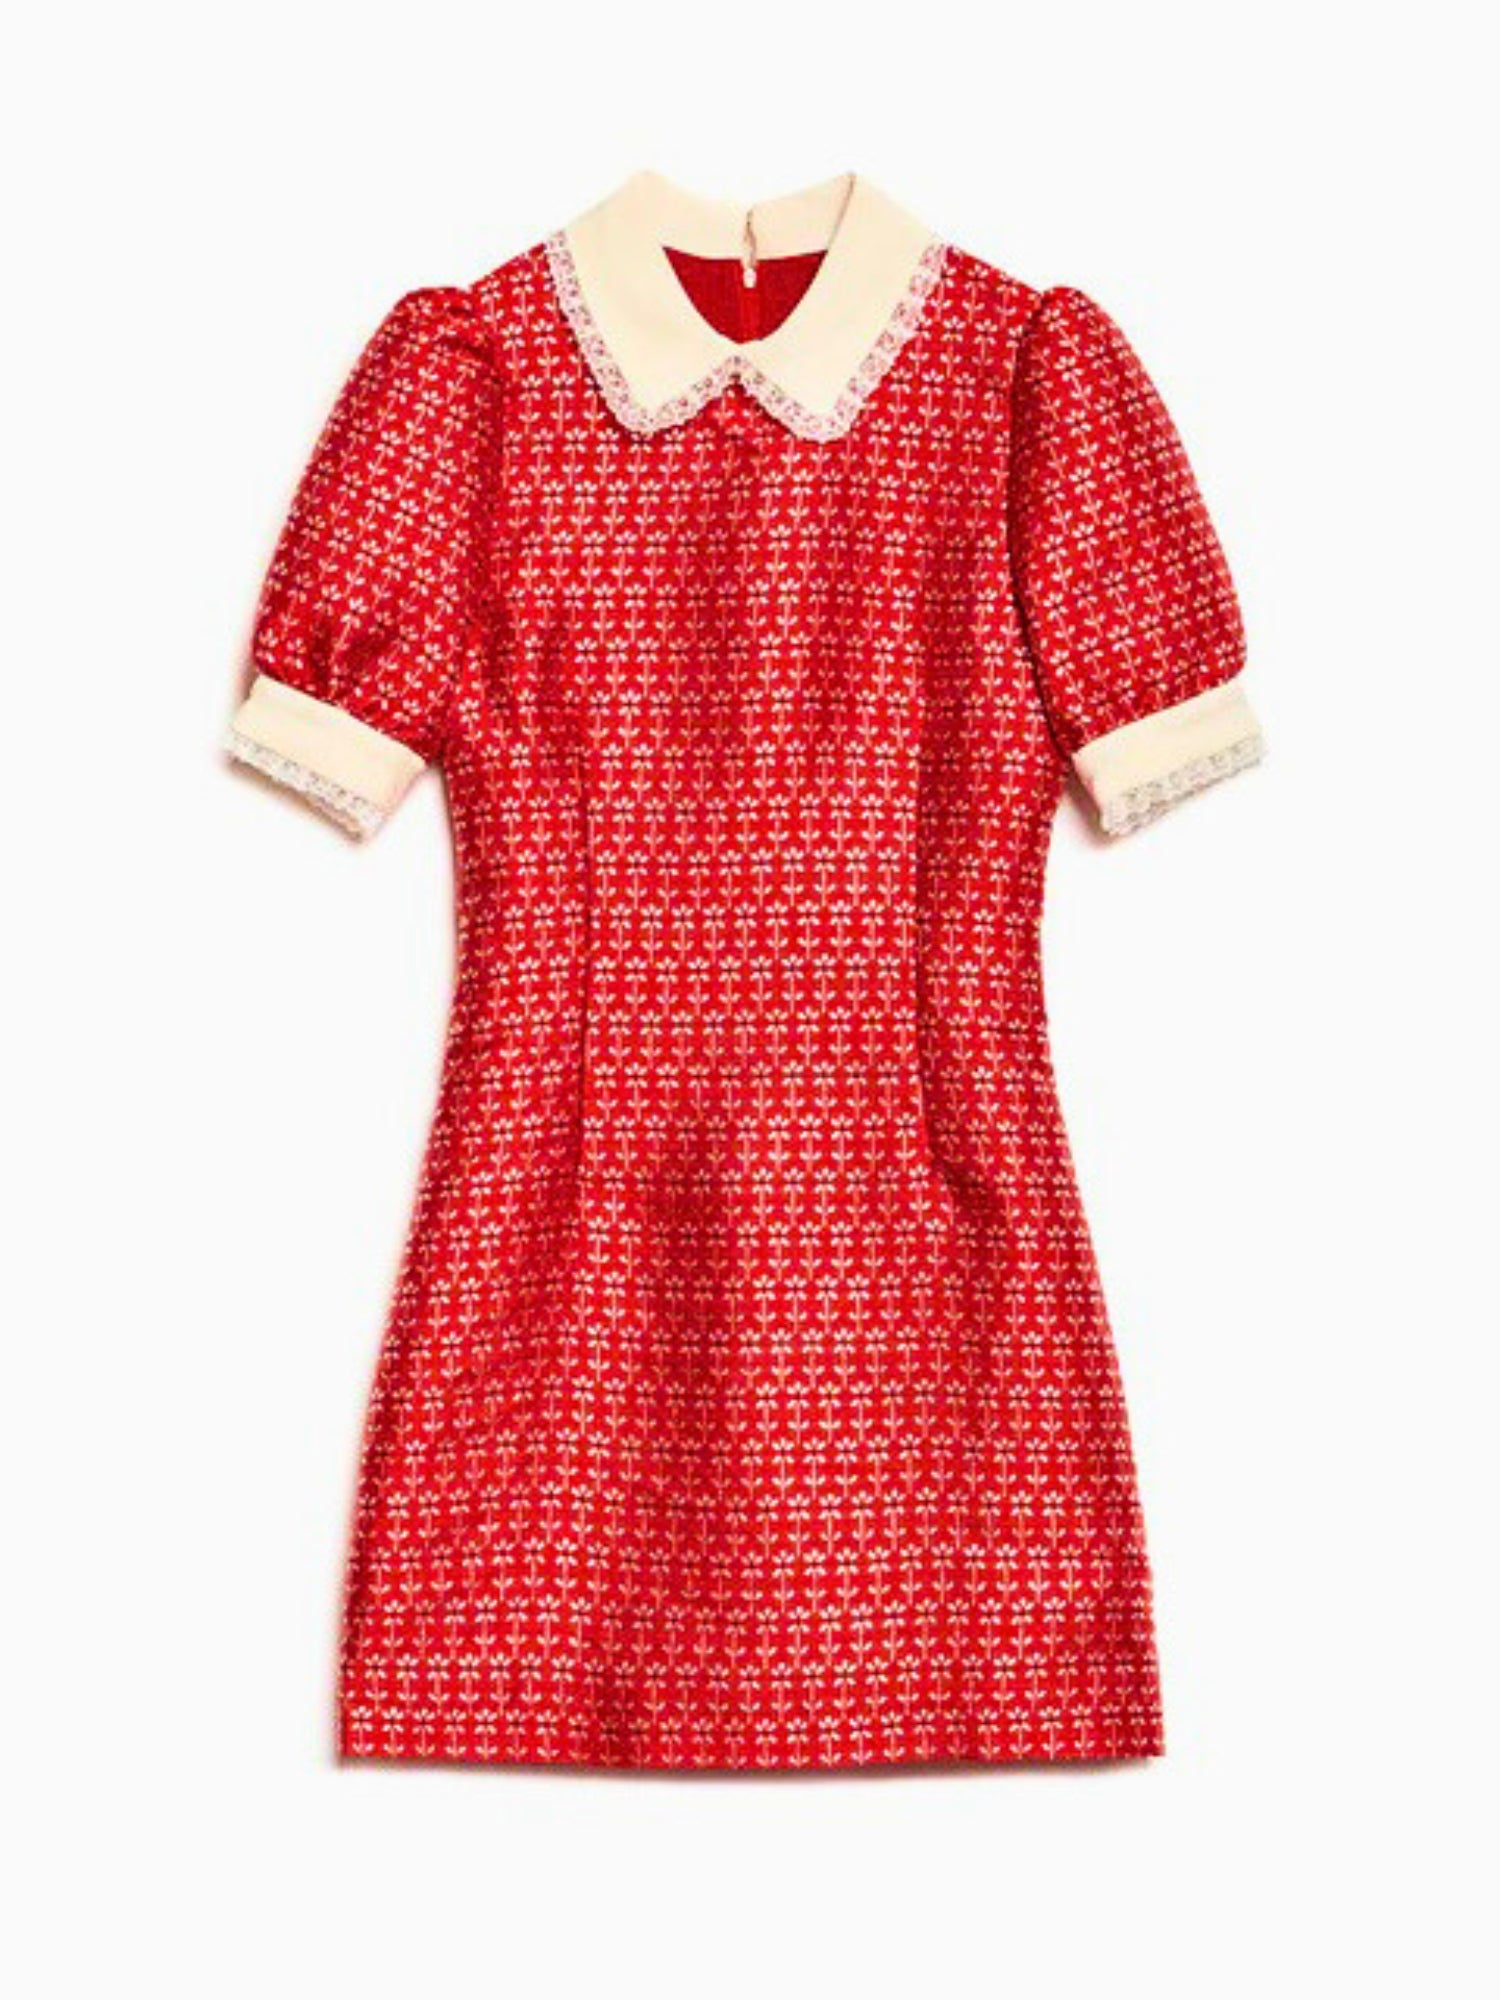 On Stage Jacquard Mini Dress, Dresses, Sister Jane - Ivory Sheep Collection Limited